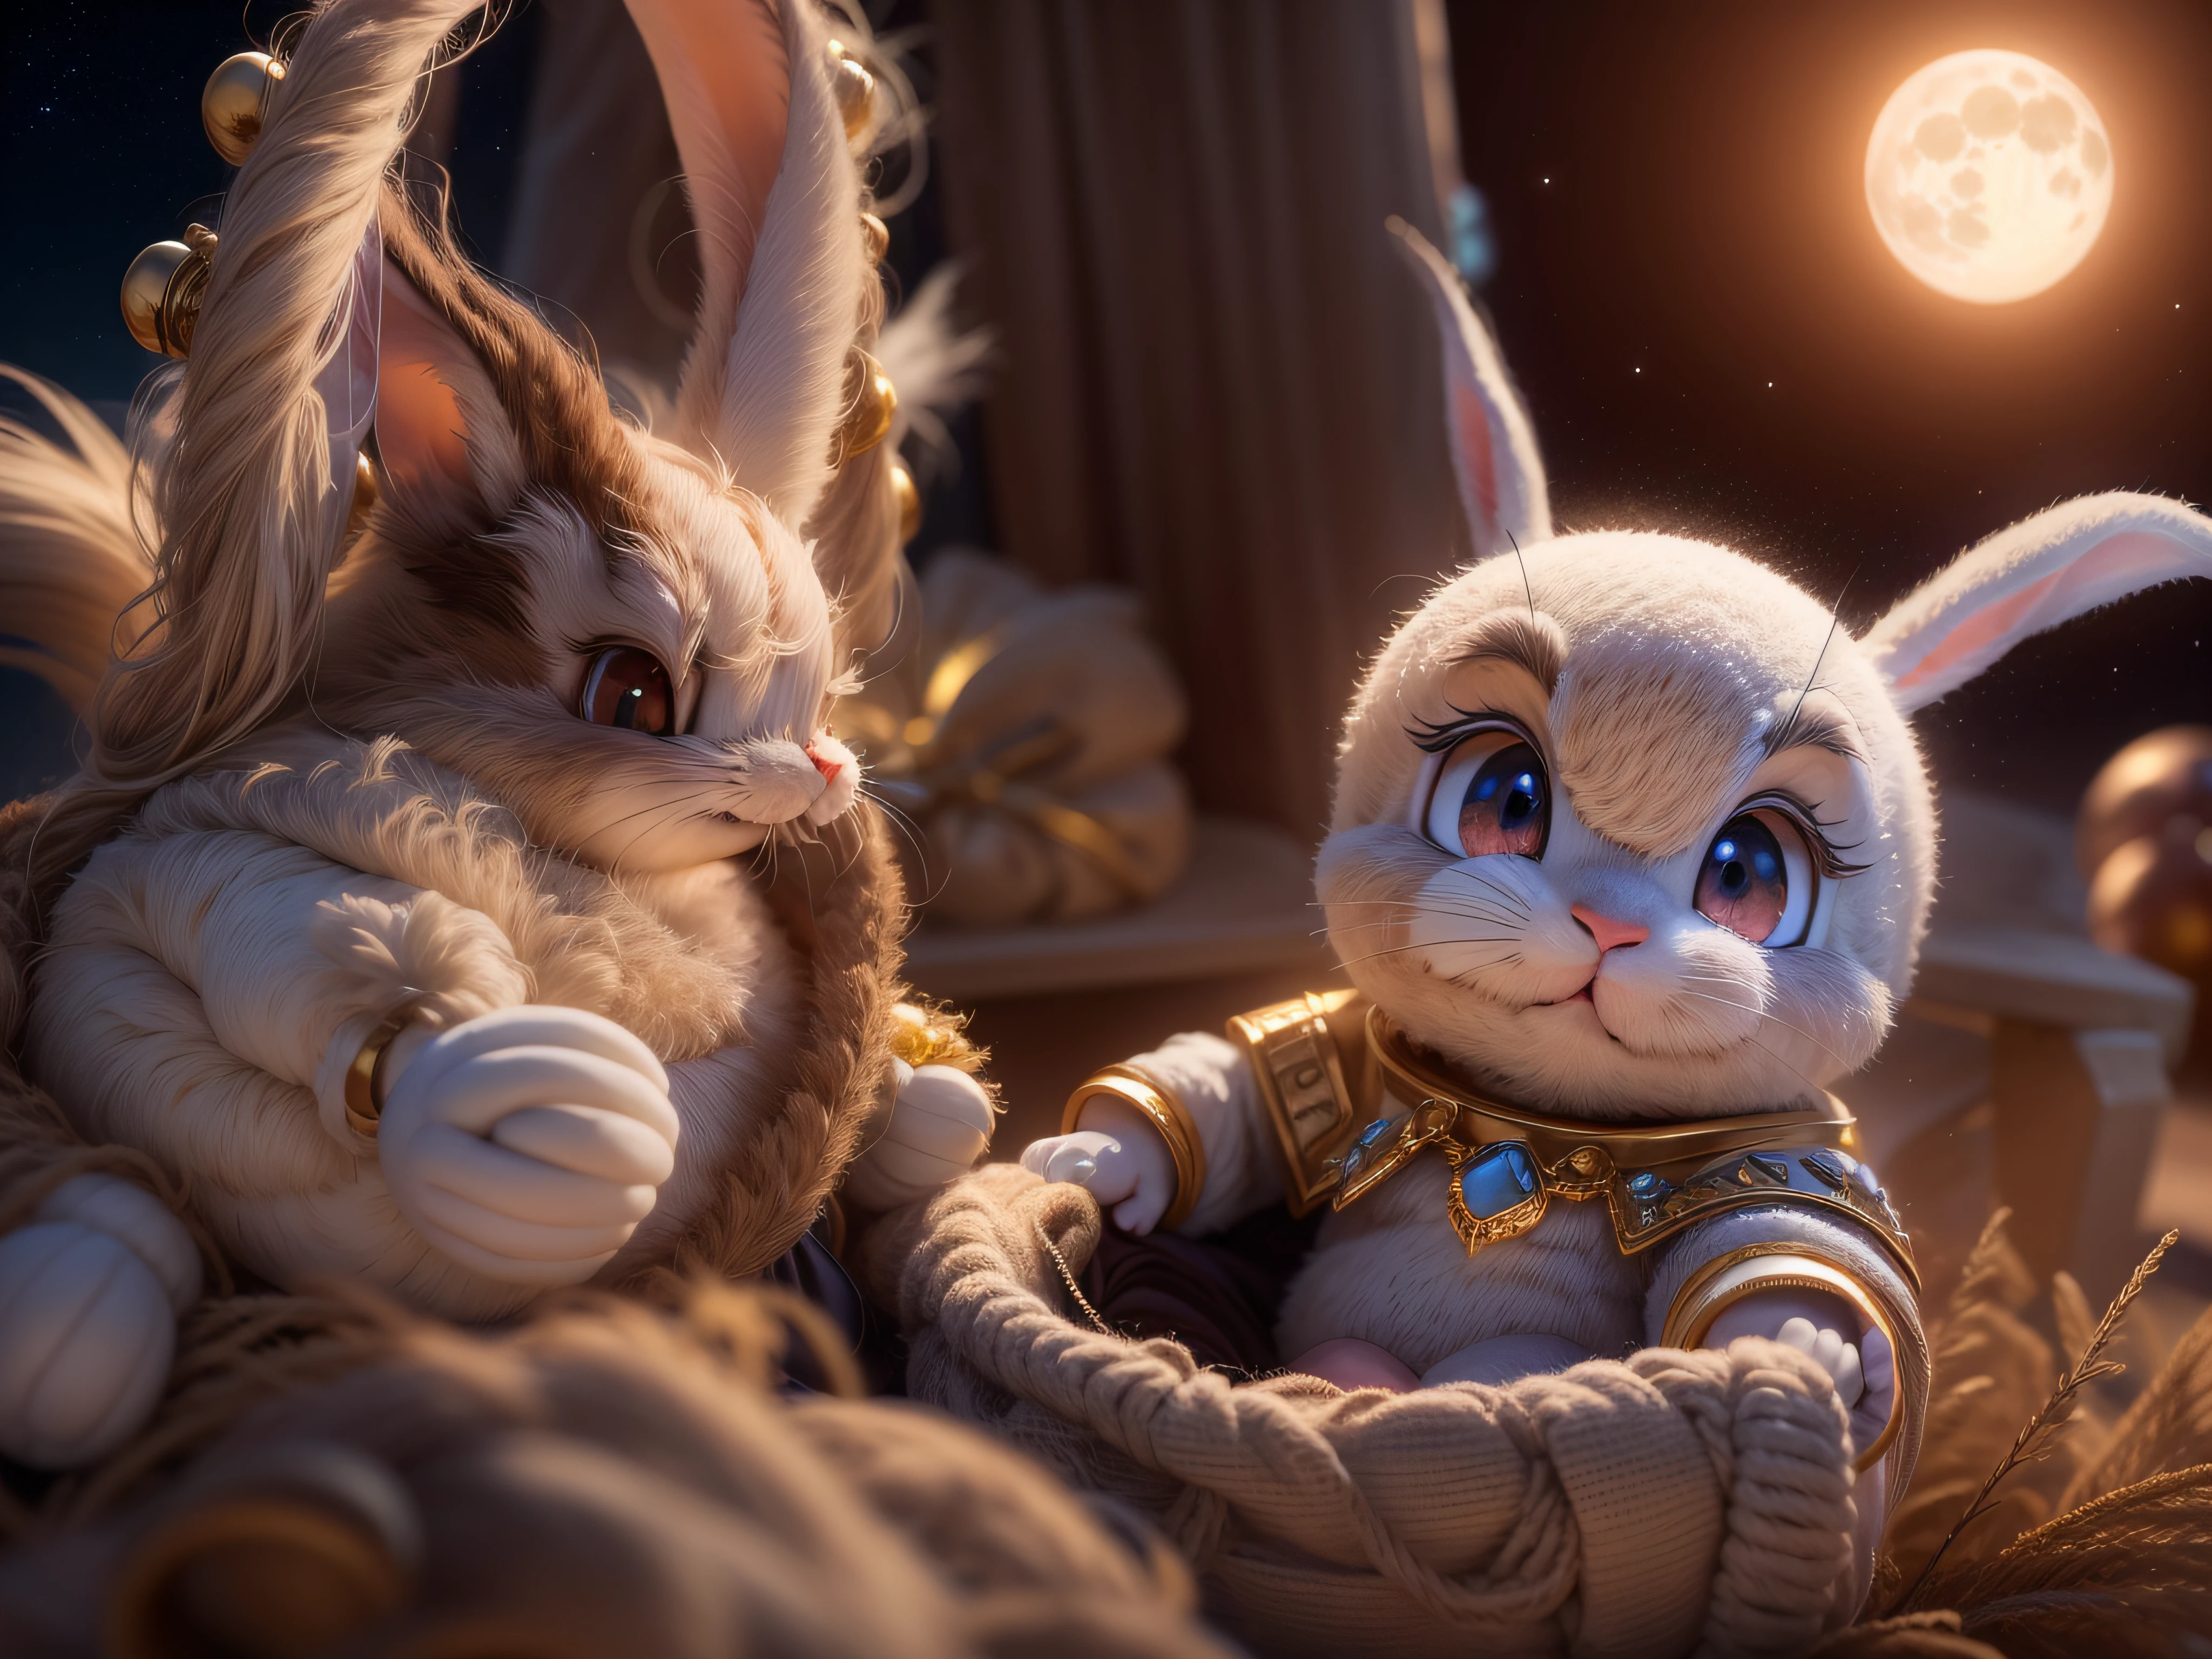 Close a powerful threat, The graceful appearance of Bugs Bunny in the form of a baby dressed in beige uniform in a manger, menacing stare, ricamente detalhado, Hiper realista, 3D-rendering, obra-prima, NVIDIA, RTX, ray-traced, Bokeh, Night sky with a huge and beautiful full moon, estrelas brilhando, 8k,